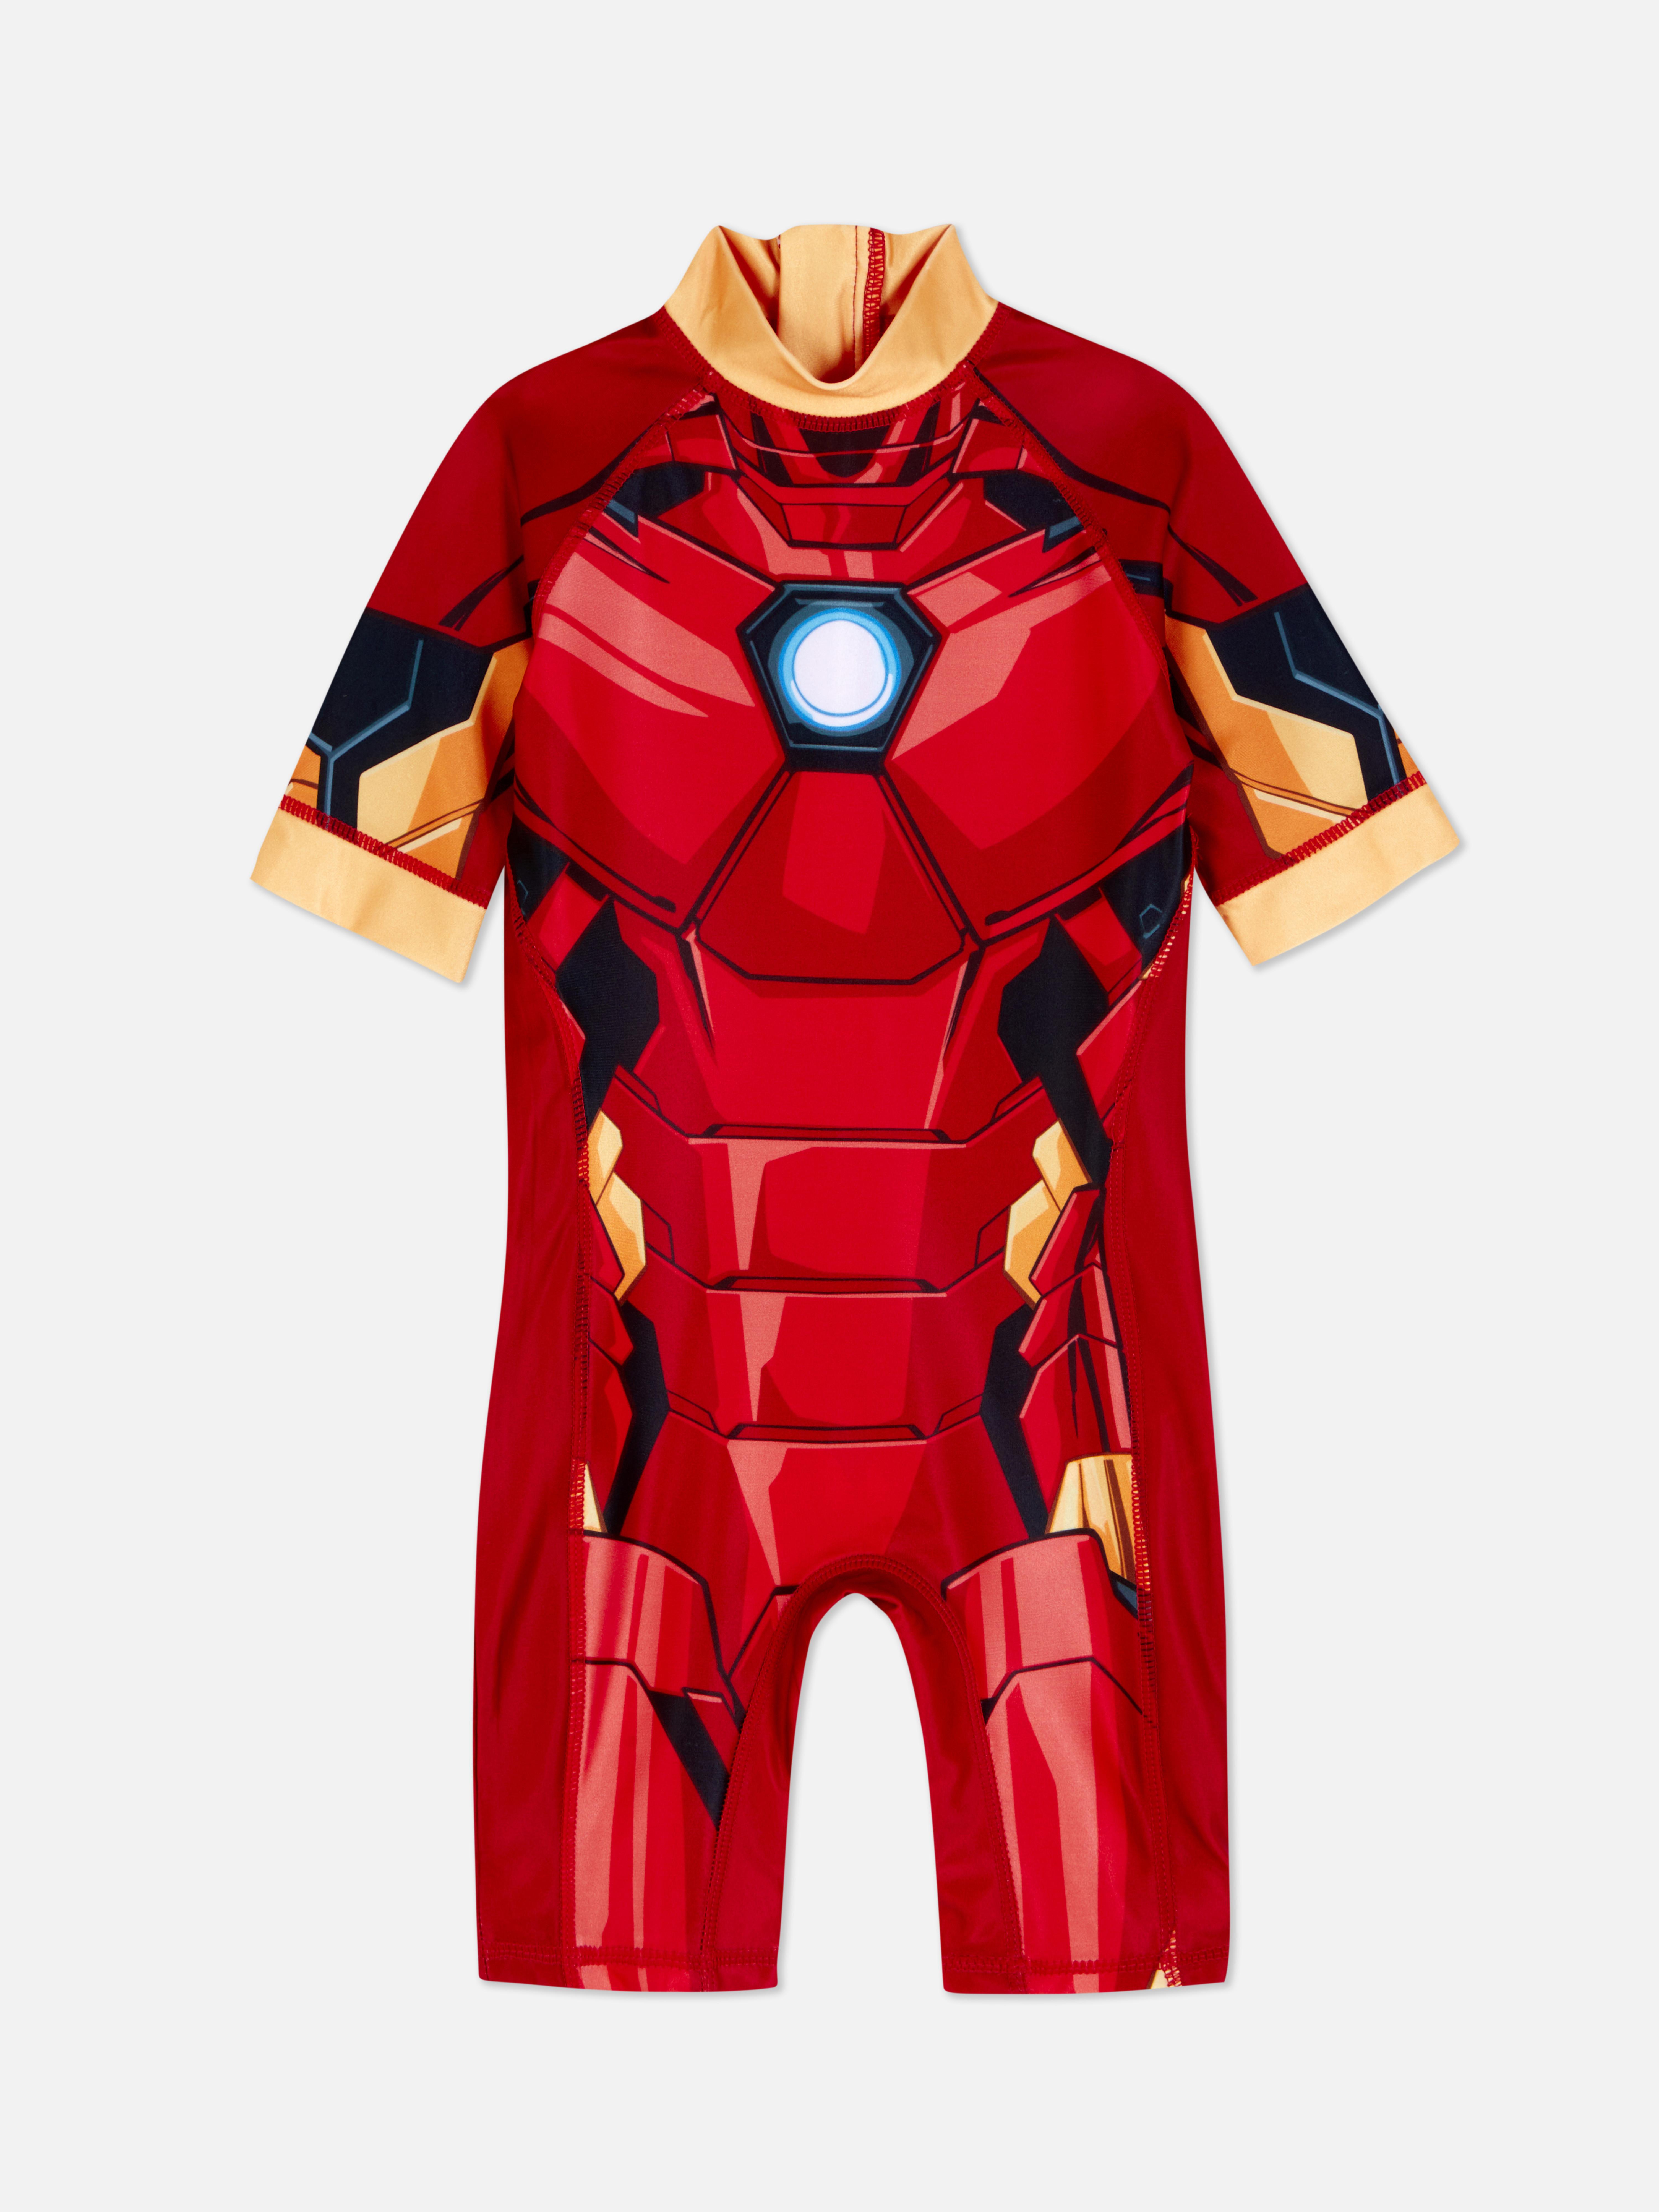 Marvel Iron Man Wetsuit Red